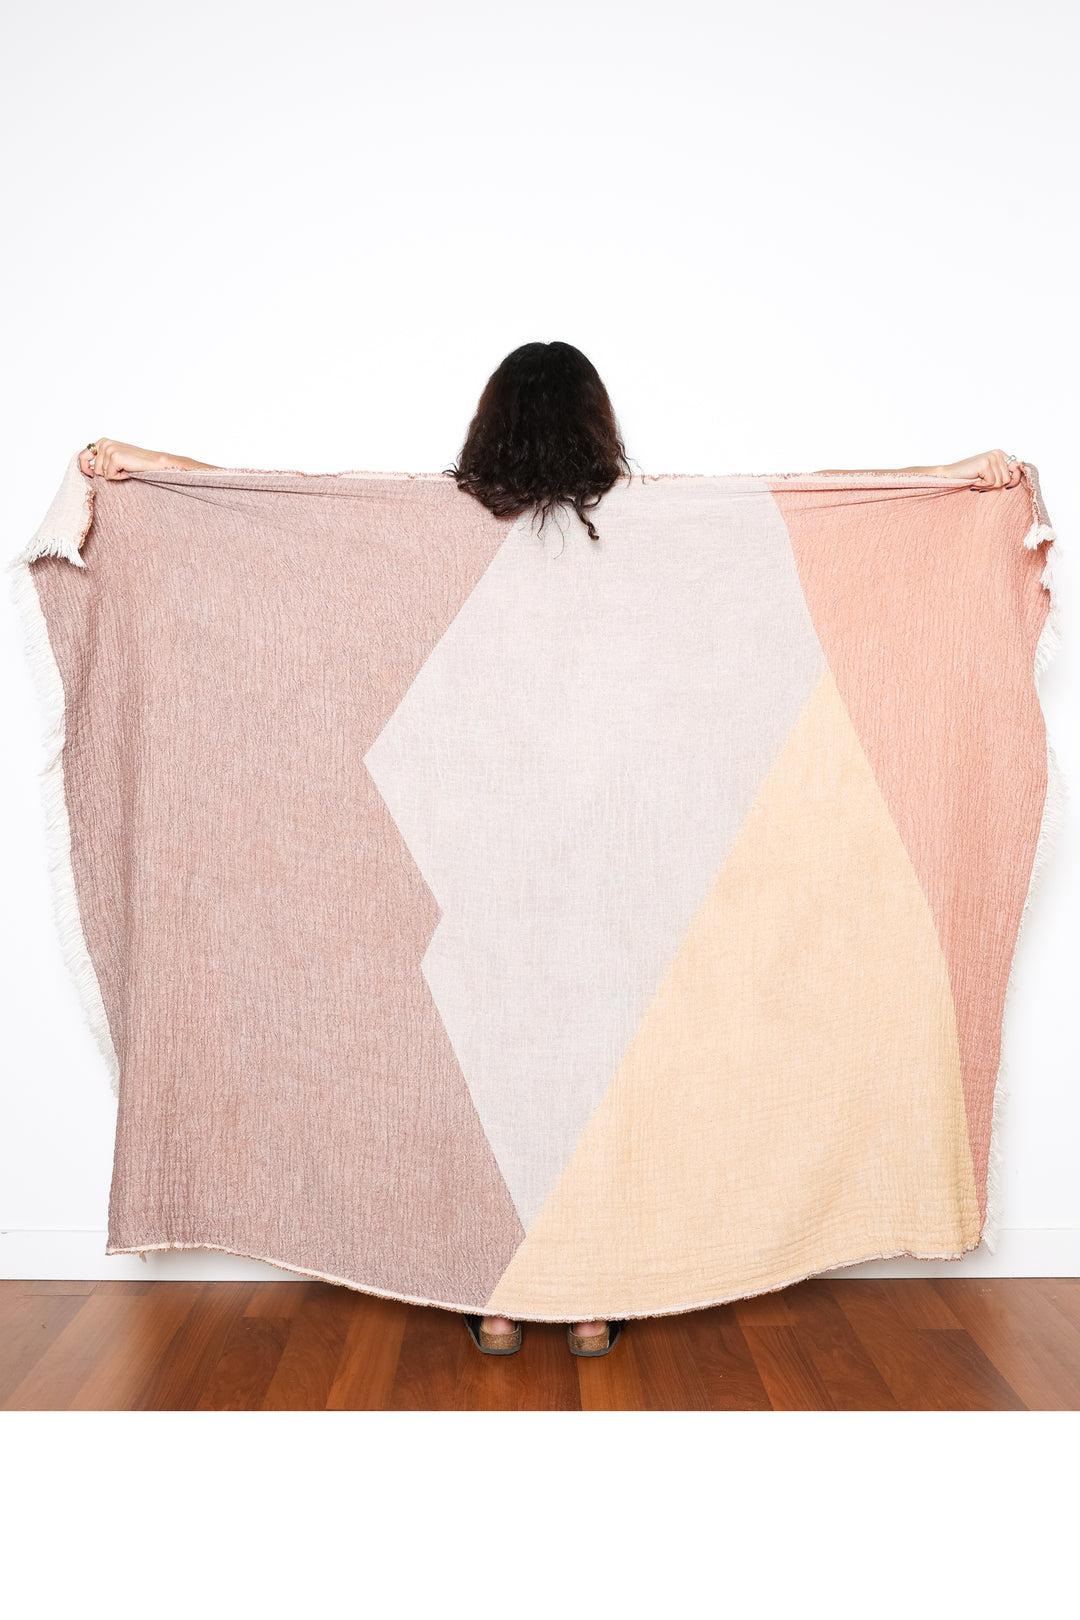 The Meander Throw